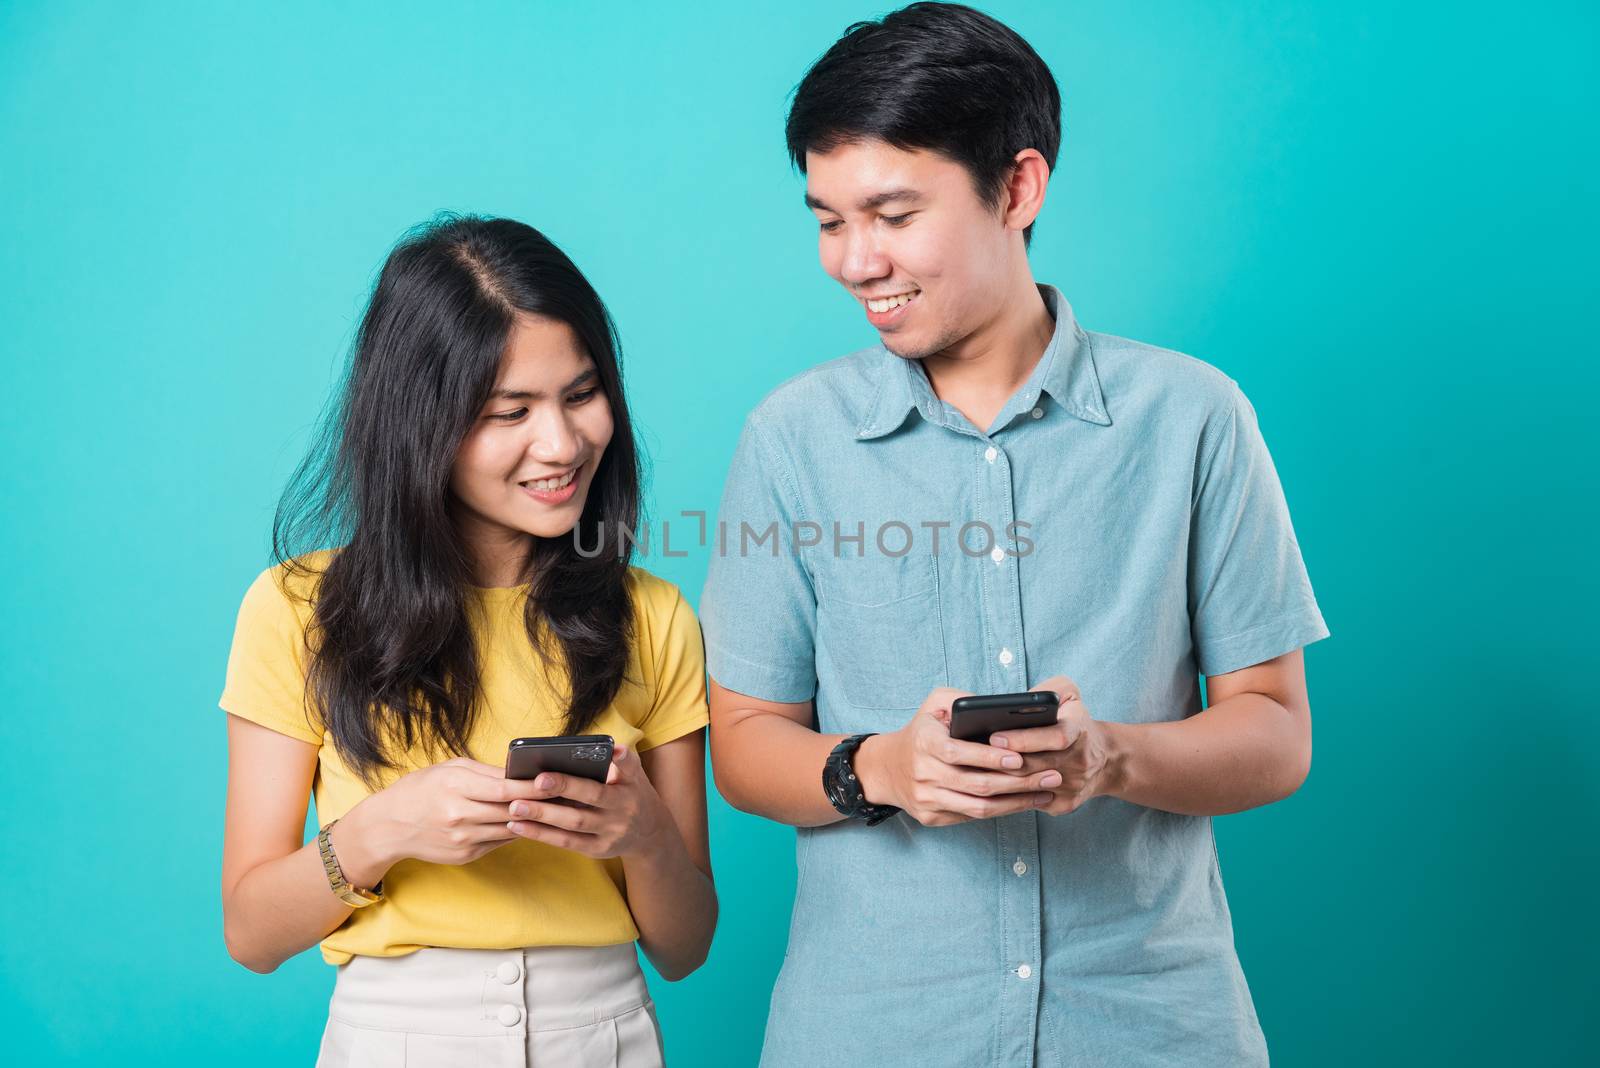 Portrait happy Asian young handsome man, beautiful woman couple smile standing wear shirt, excited young couple holding mobile phones looking at cellphone, studio shot on blue background